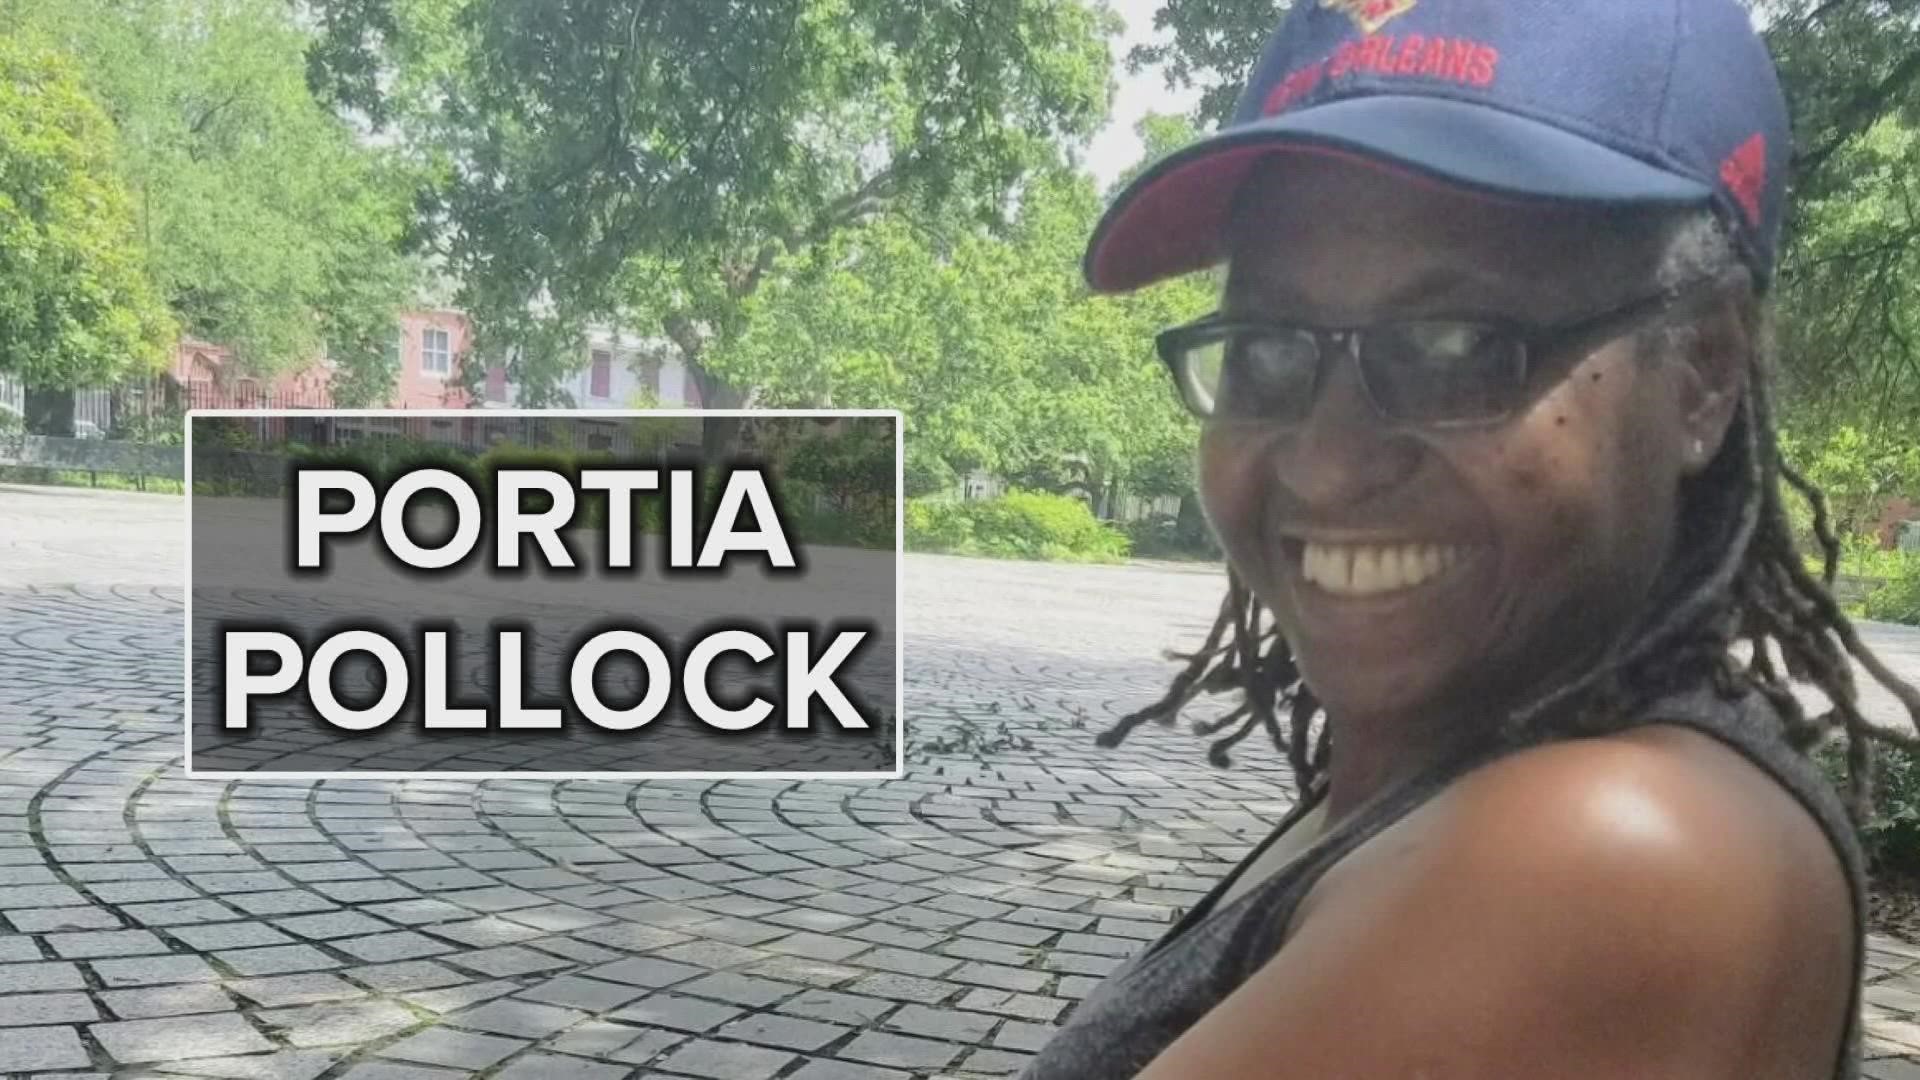 The man police said is responsible for the murder of Portia Pollock last summer, has pleaded guilty to a charge of second-degree murder.